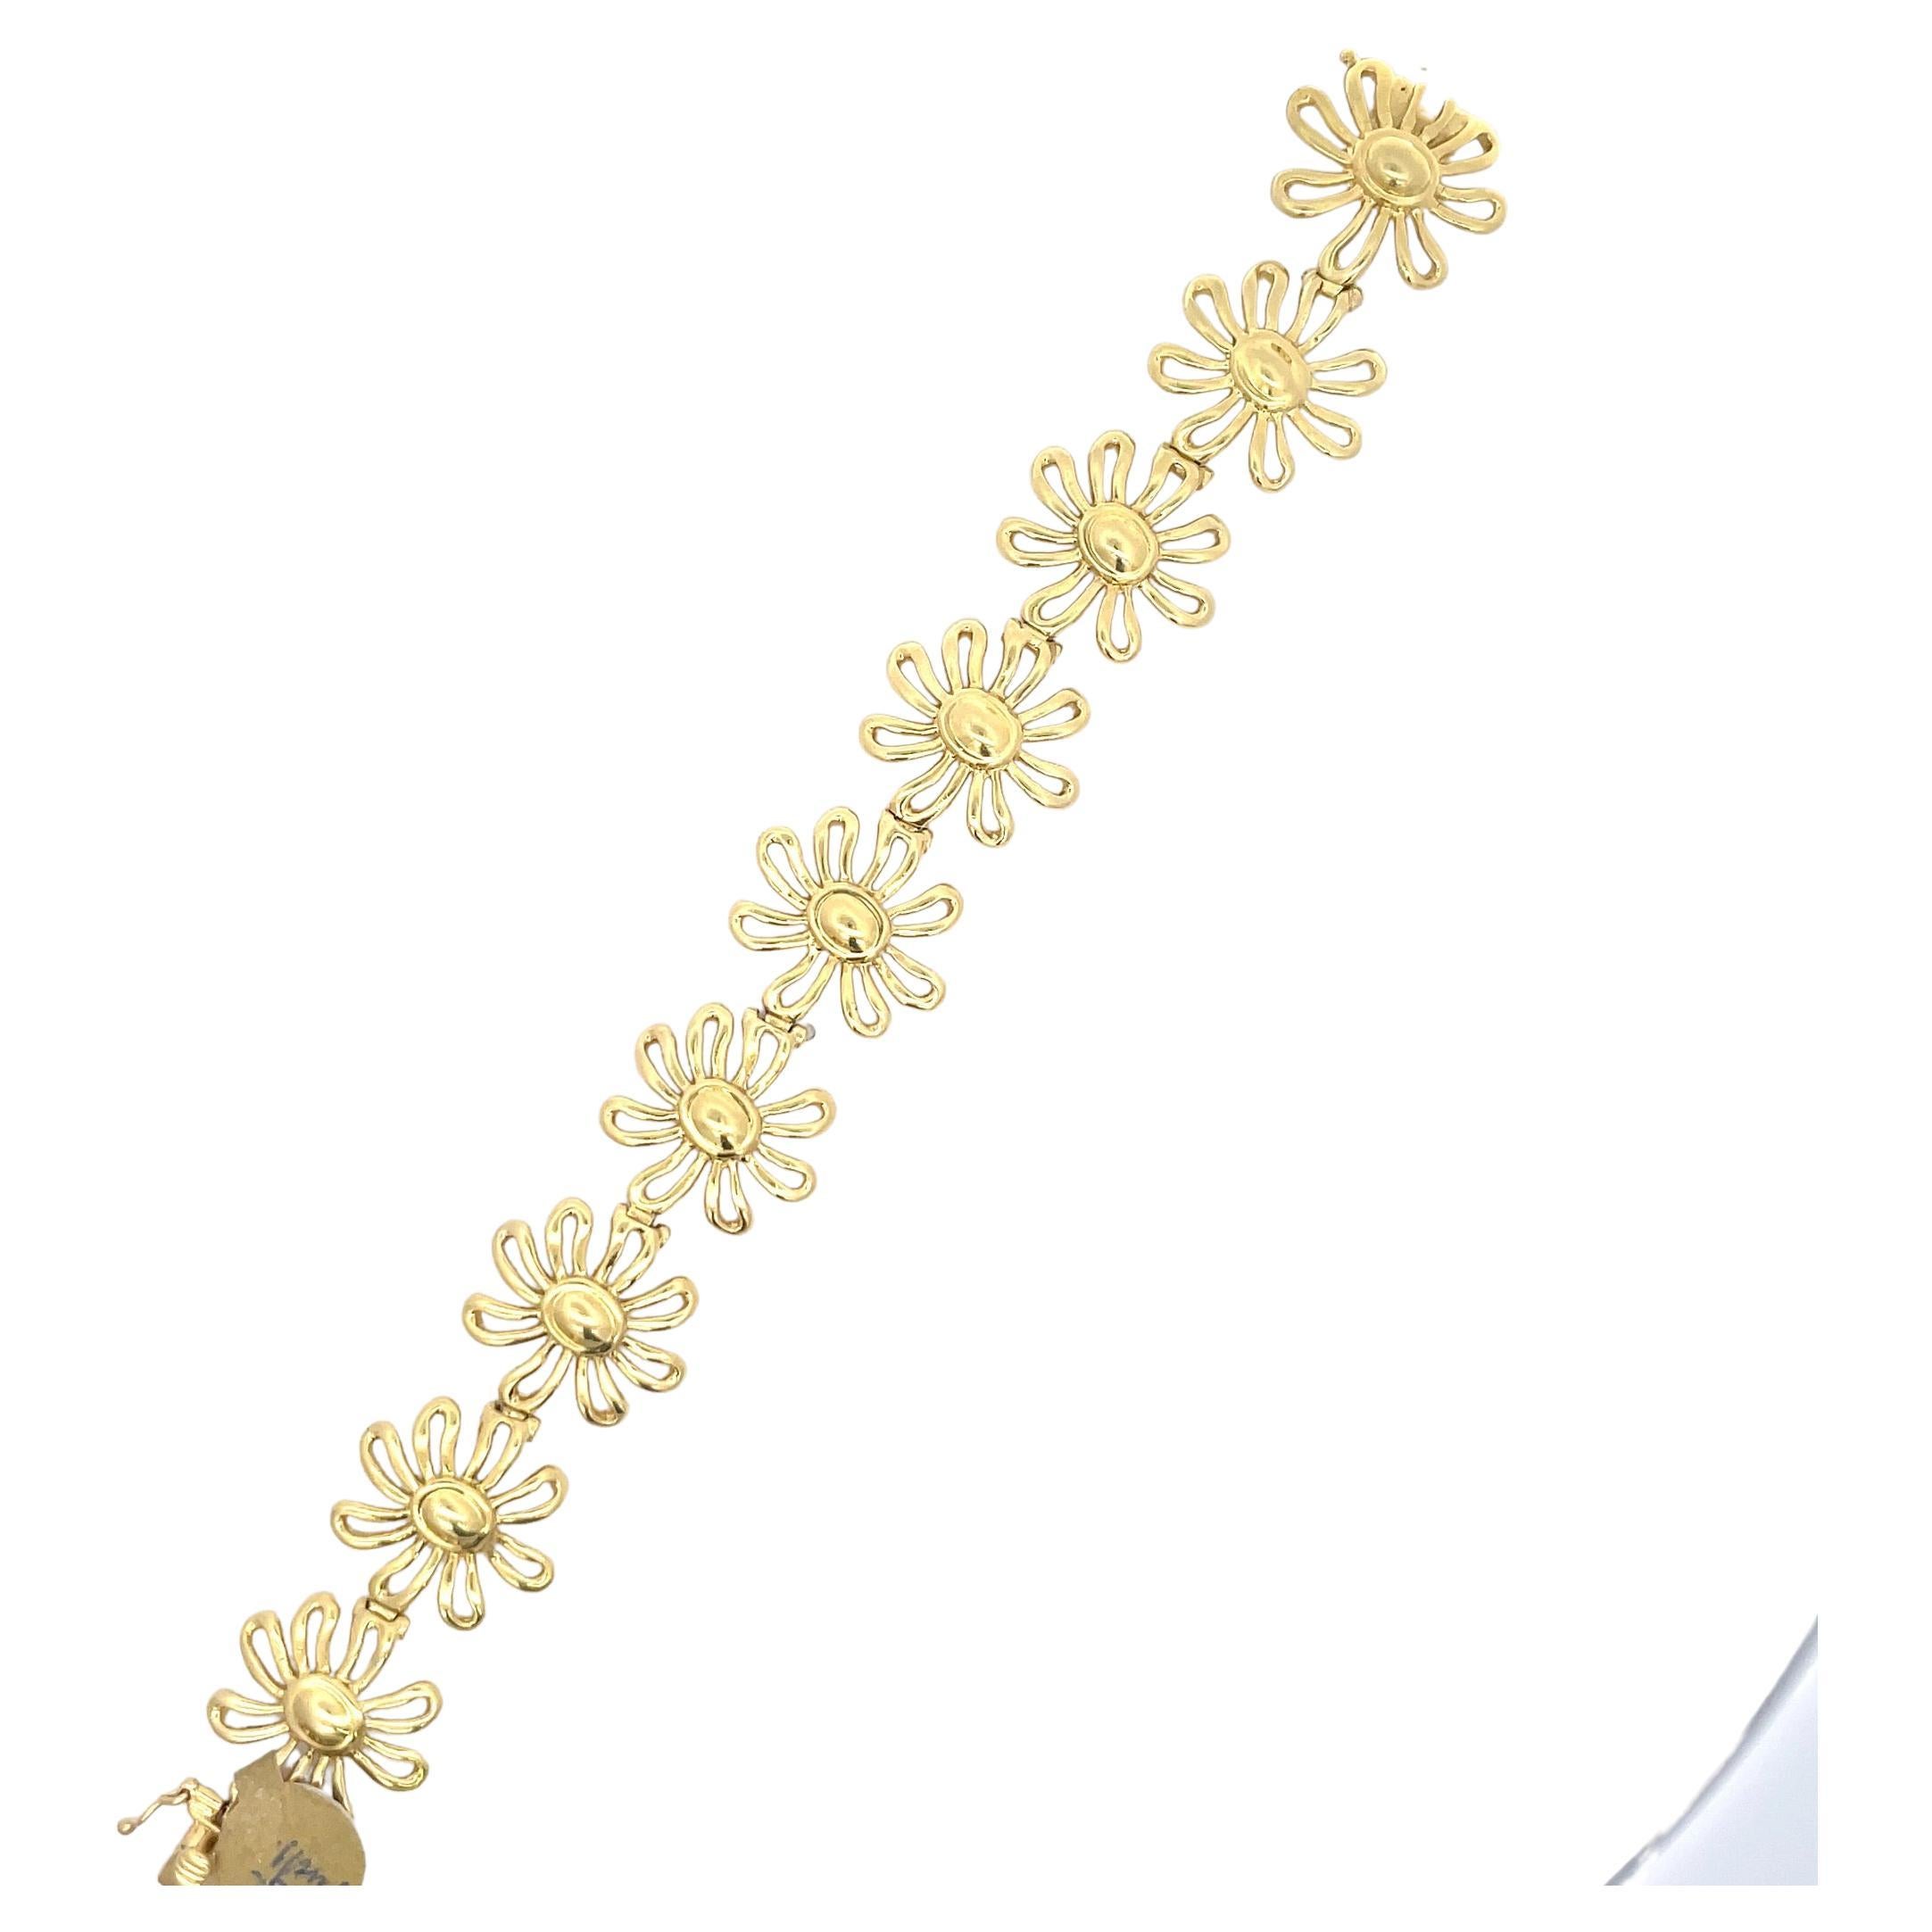 Tiffany & Co. Paloma Picasso bracelet featuring 9 Daisy flowers weighing 34.6 Grams in 18 Karat Yellow Gold.
Very Feminine! 